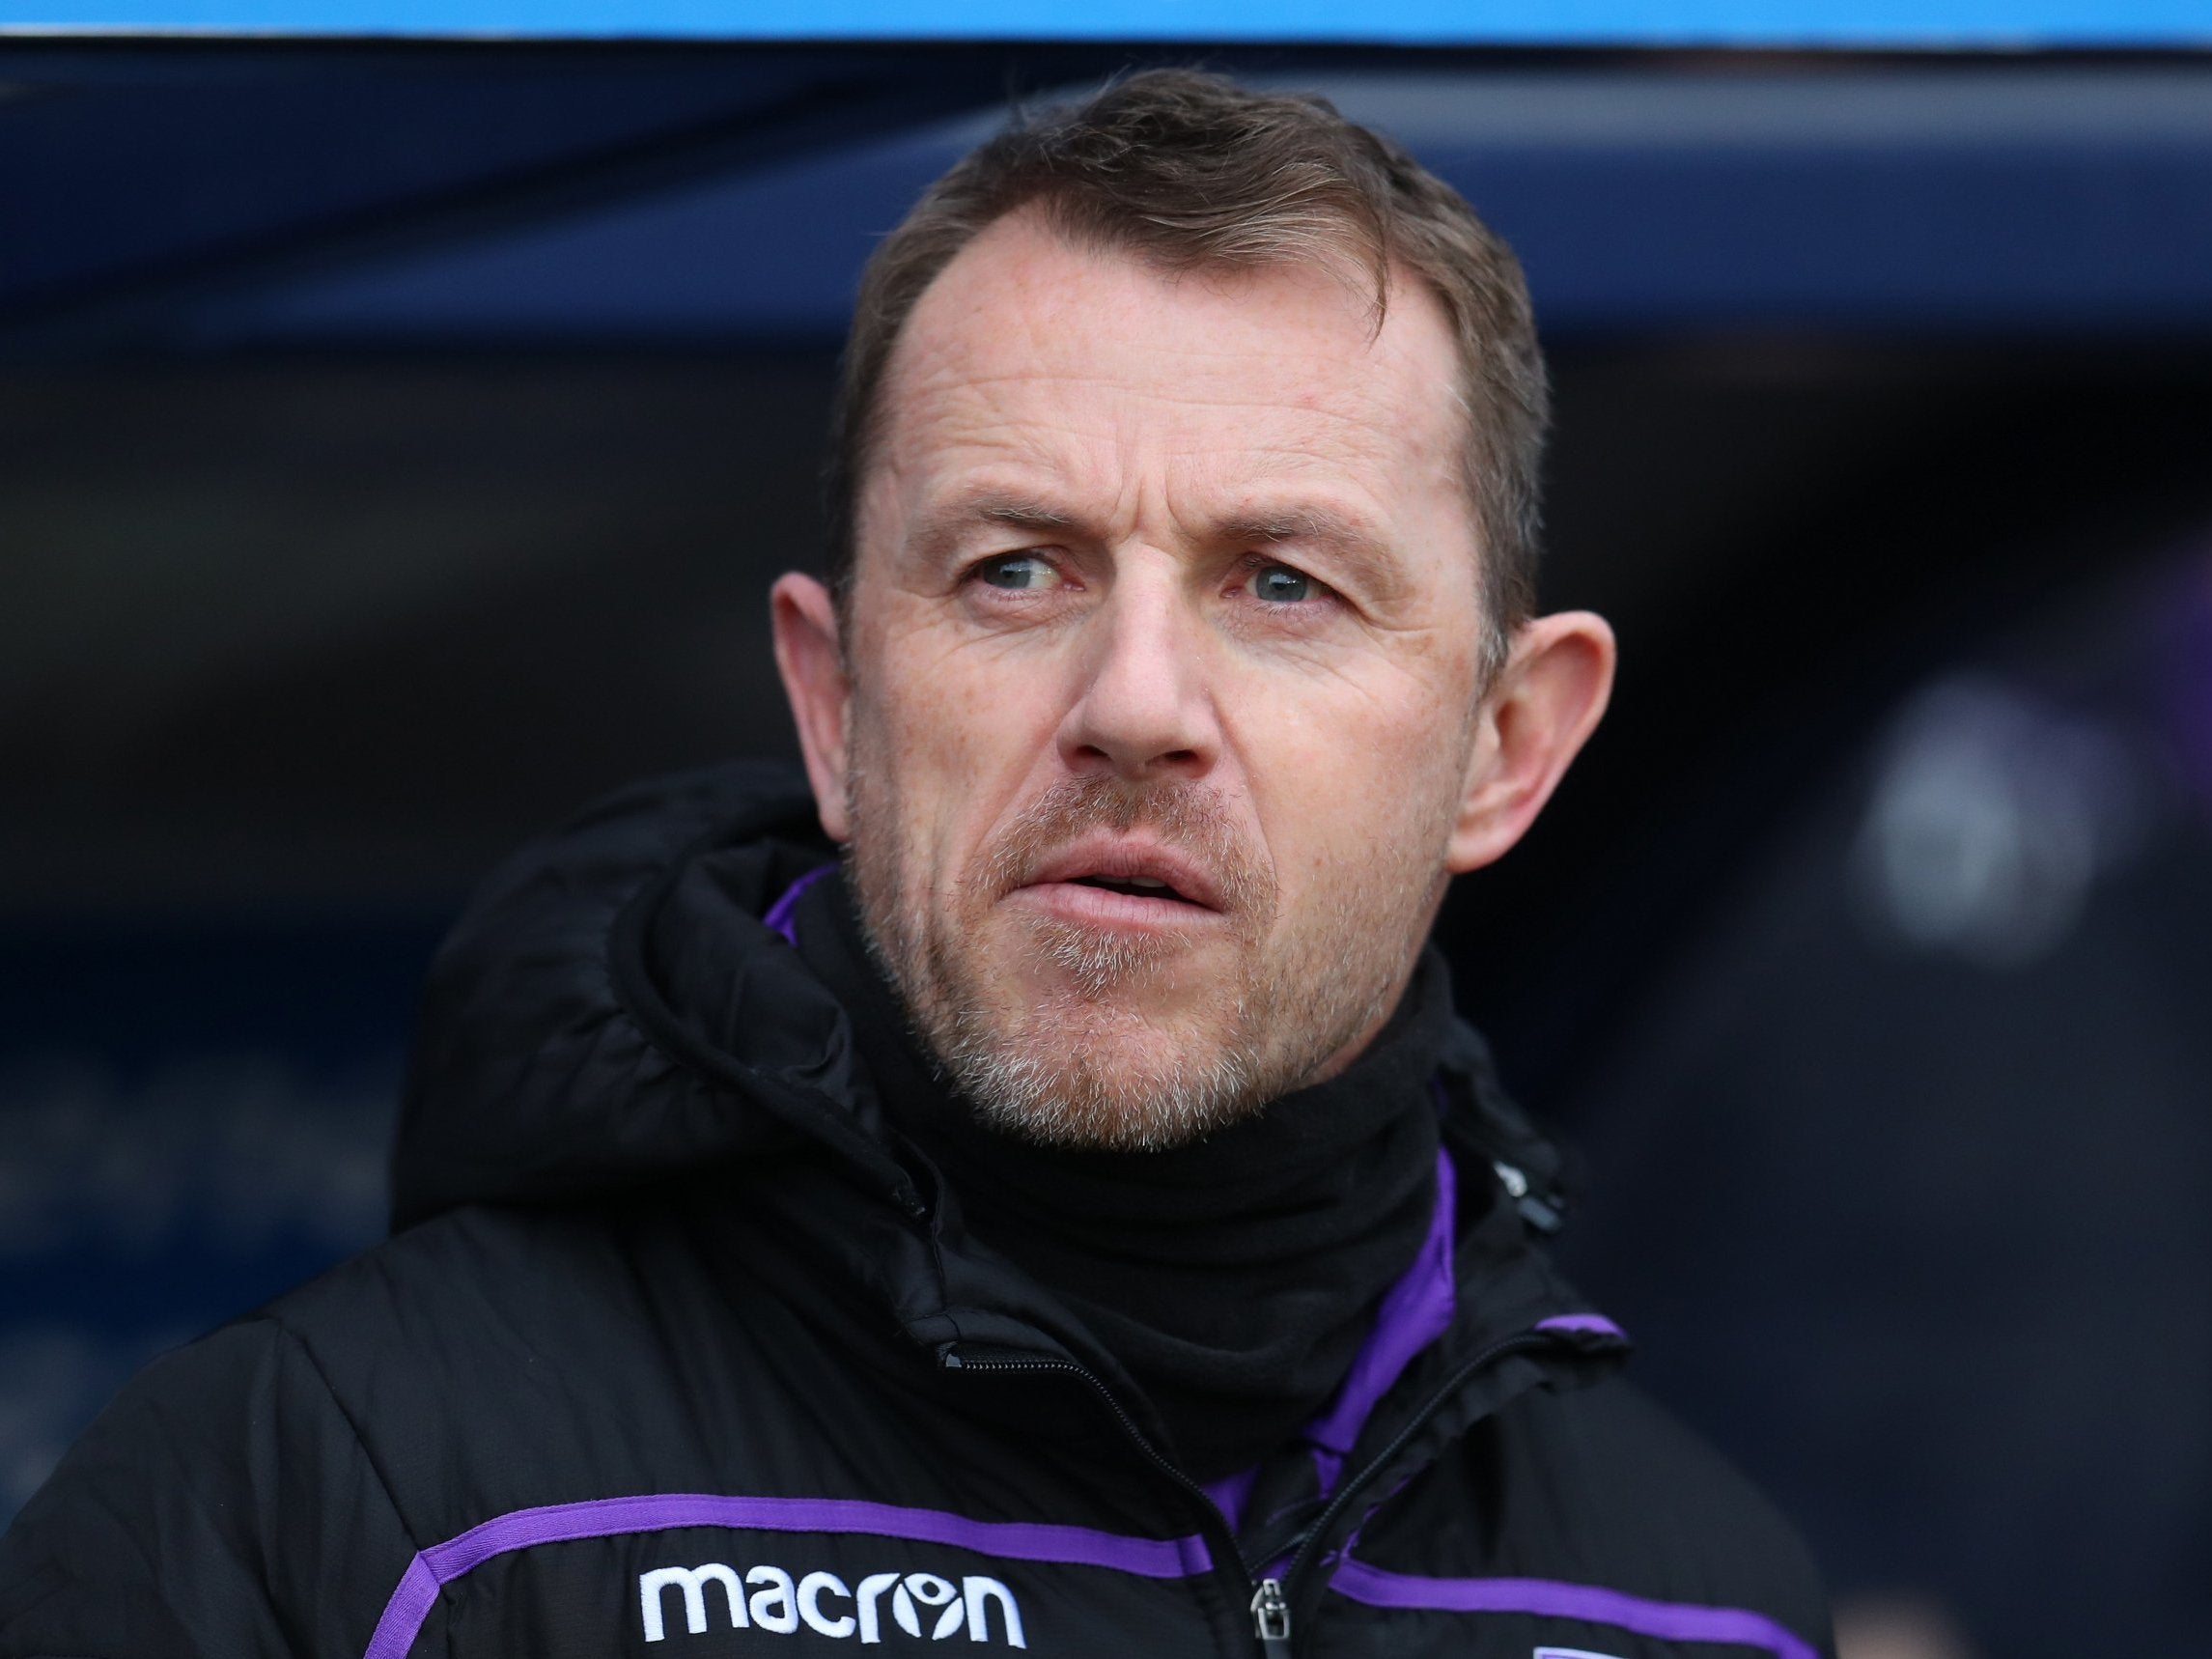 Gary Rowett has been sacked as Stoke City manager